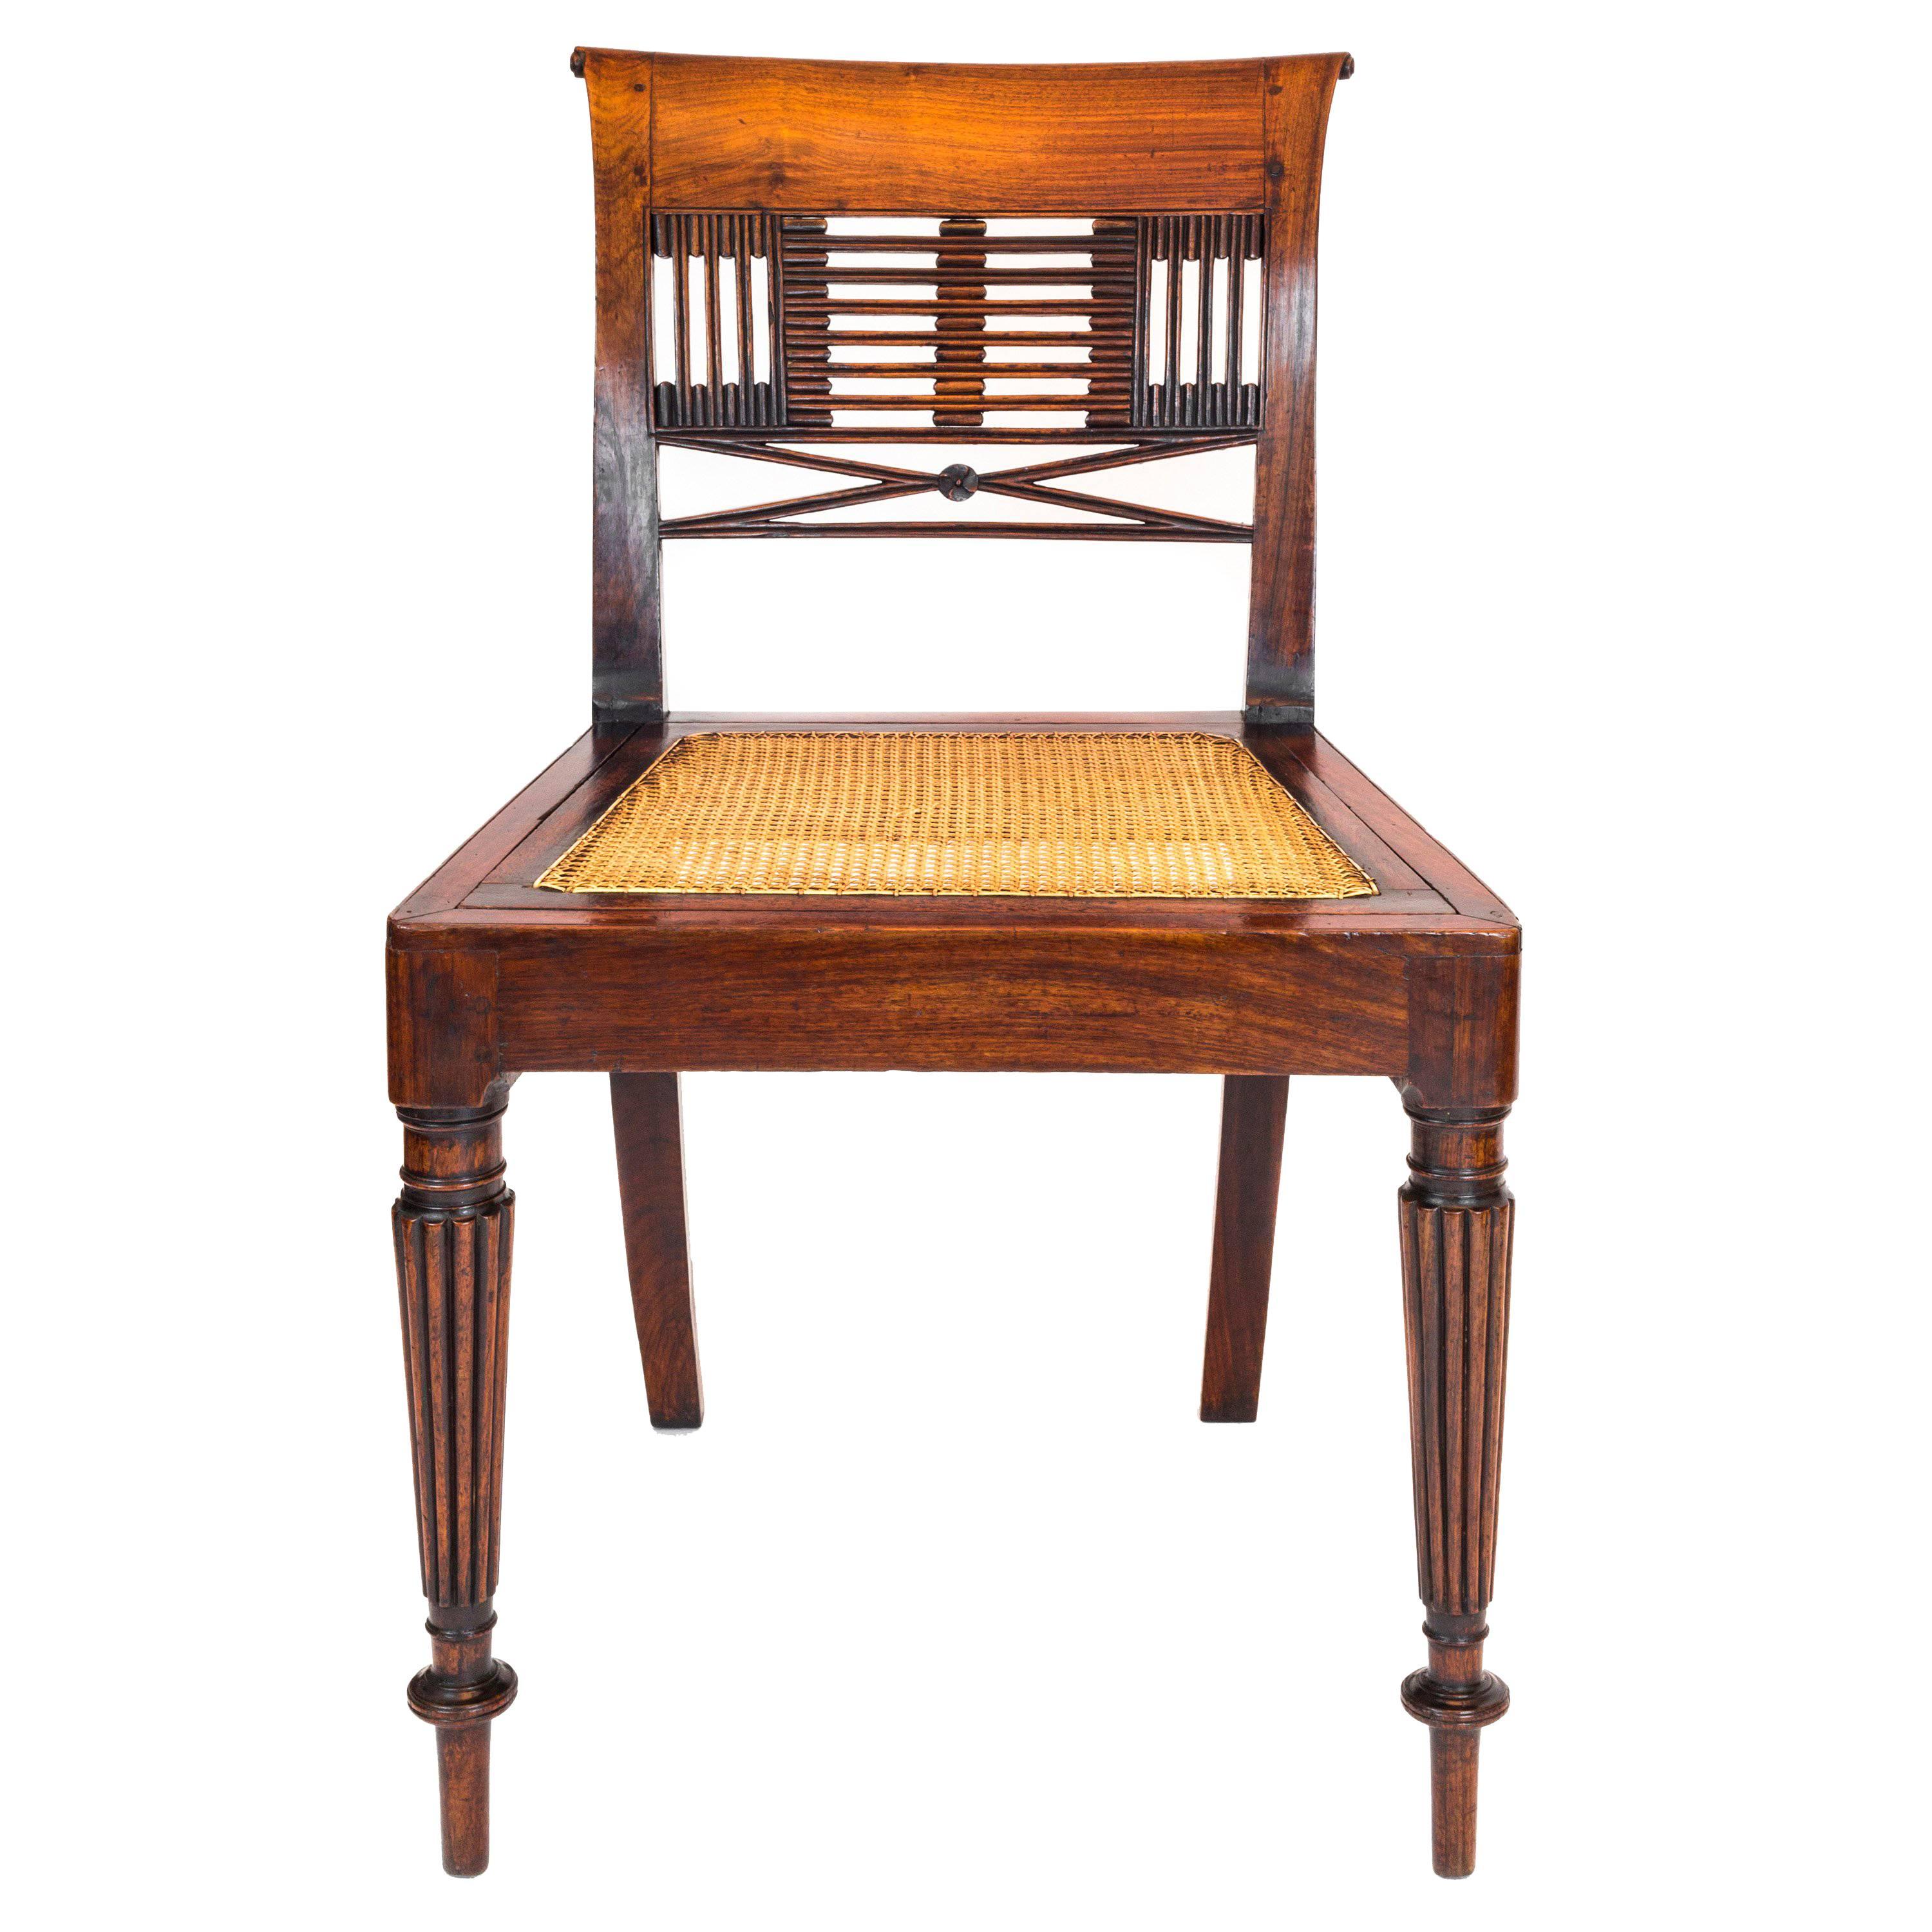 19th Century English Colonial Regency Padouk Reeded Leg Side or Desk Chair